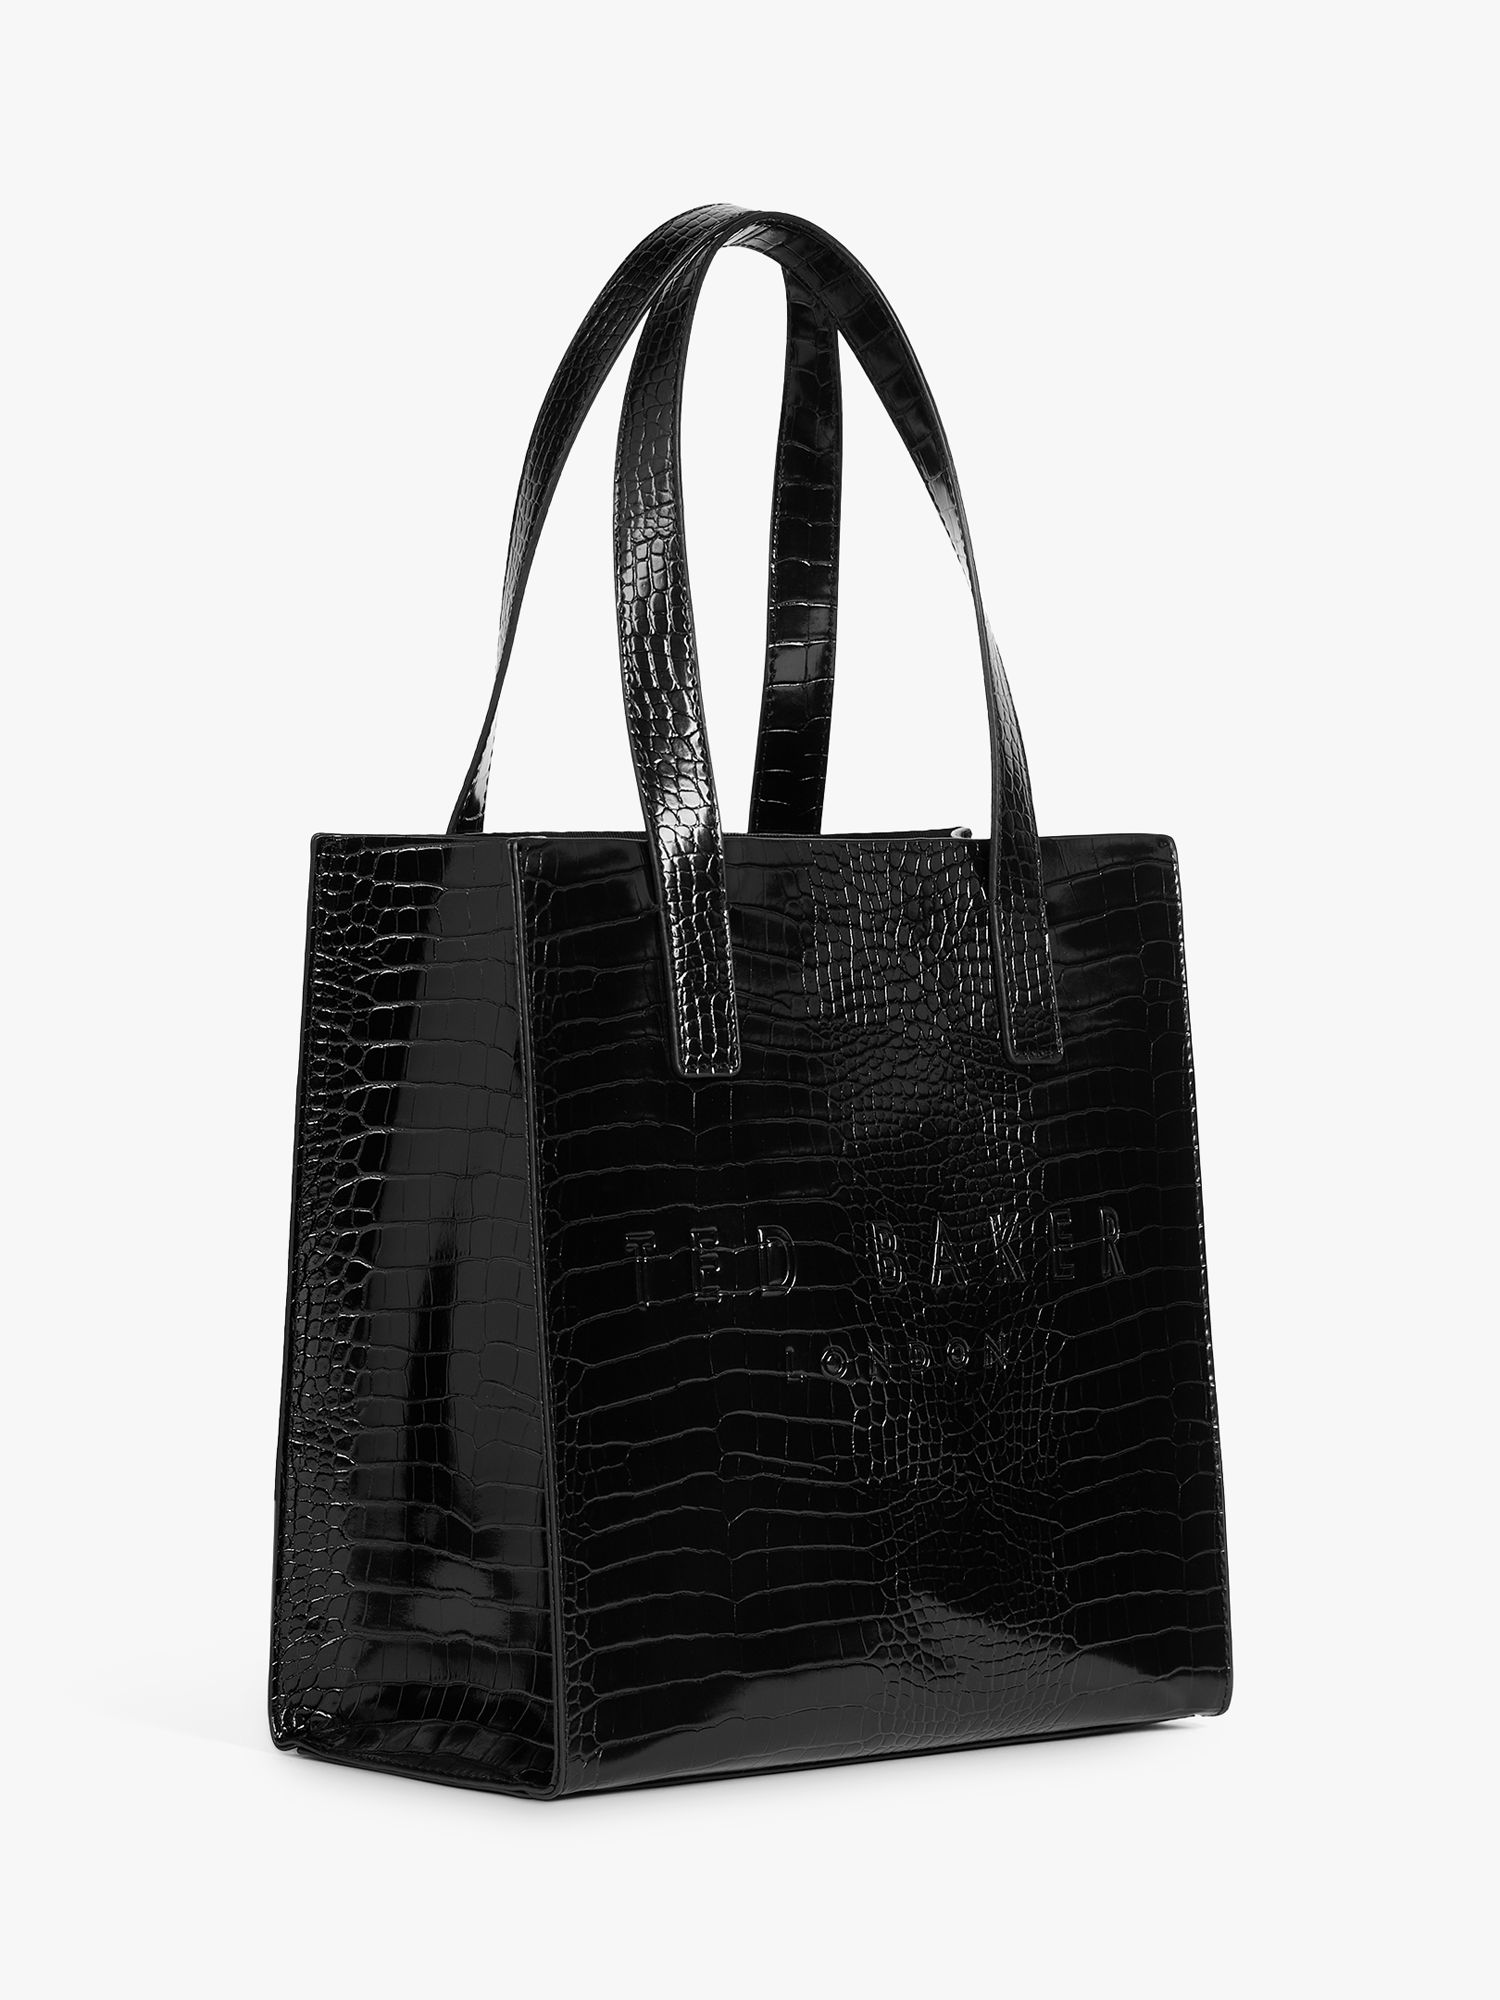 Ted Baker Reptcon Croc Effect Small Icon Tote Bag, Black, One Size